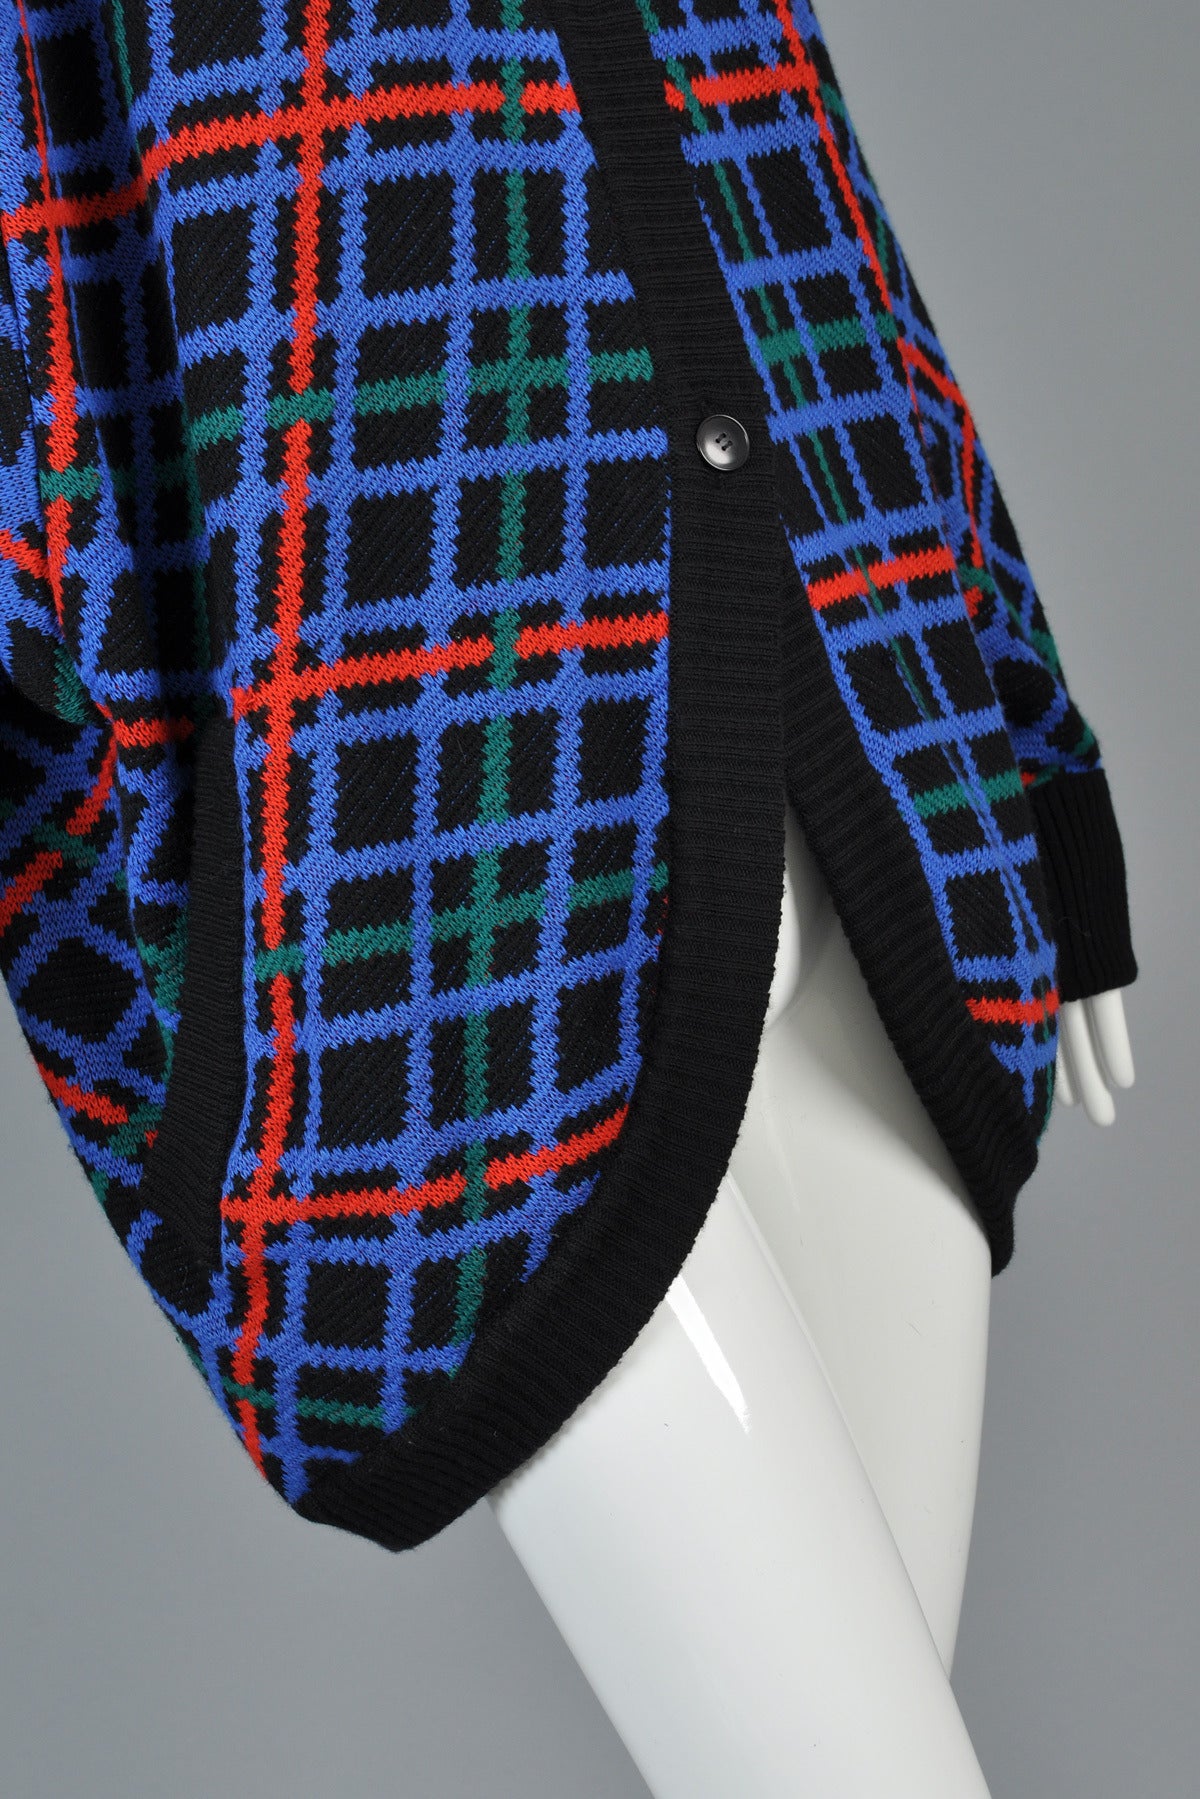 Yves Saint Laurent 1980s Plaid Hooded Knit Cocoon Jacket 4